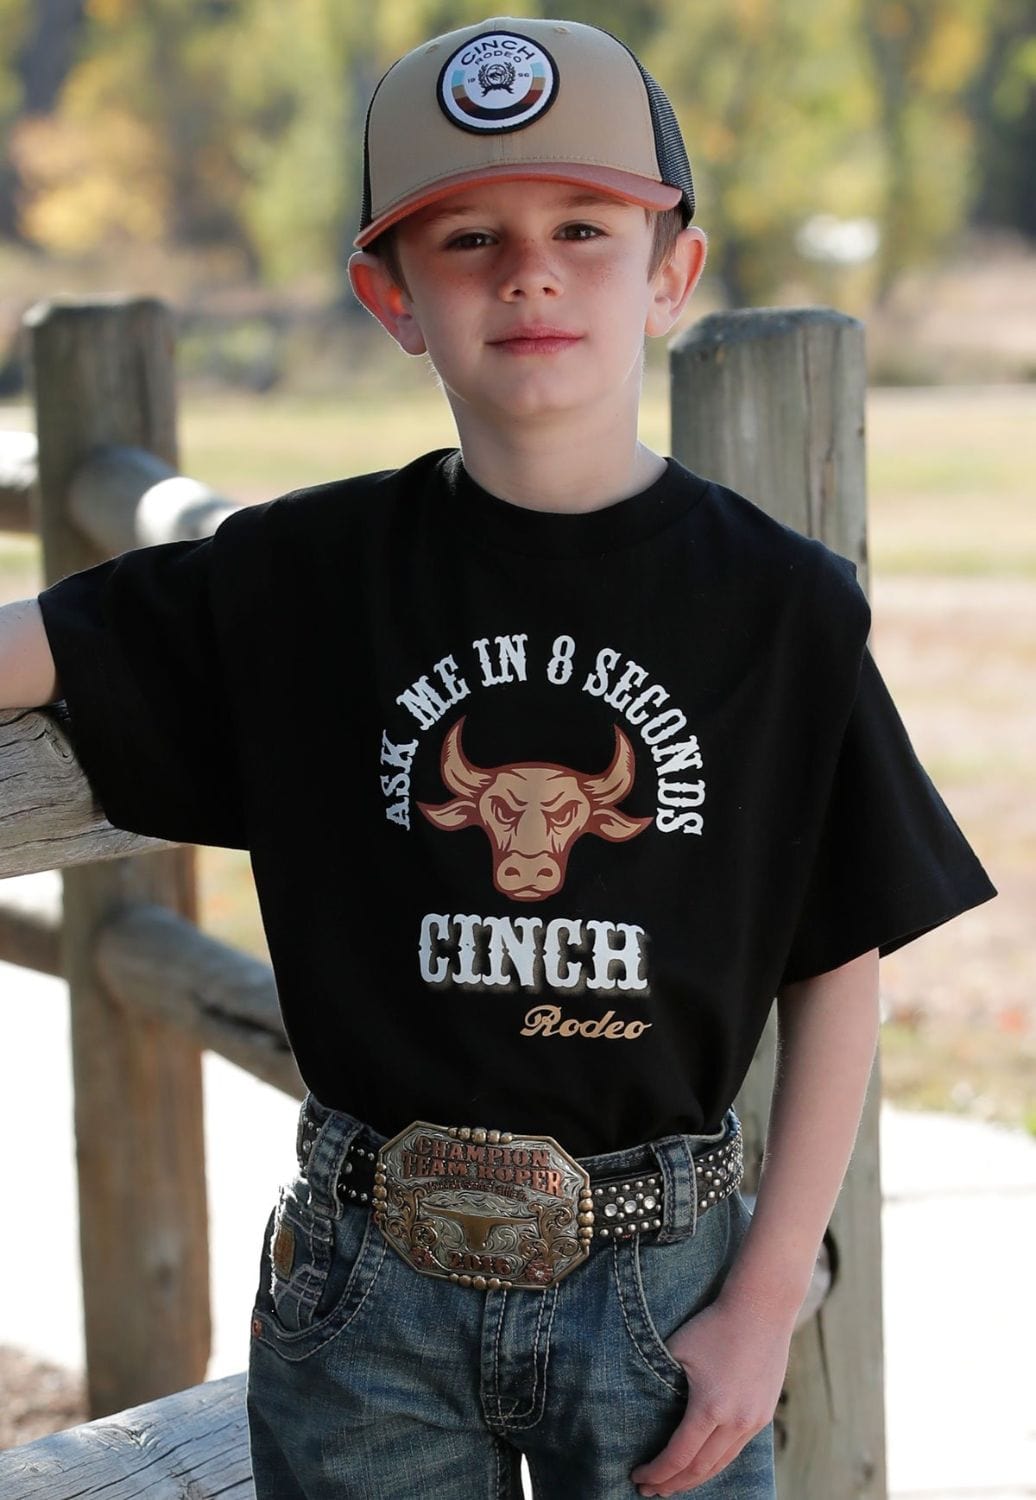 Cinch CLOTHING-Boys T-Shirts Cinch Boys Ask Me In 8 Seconds T-Shirt